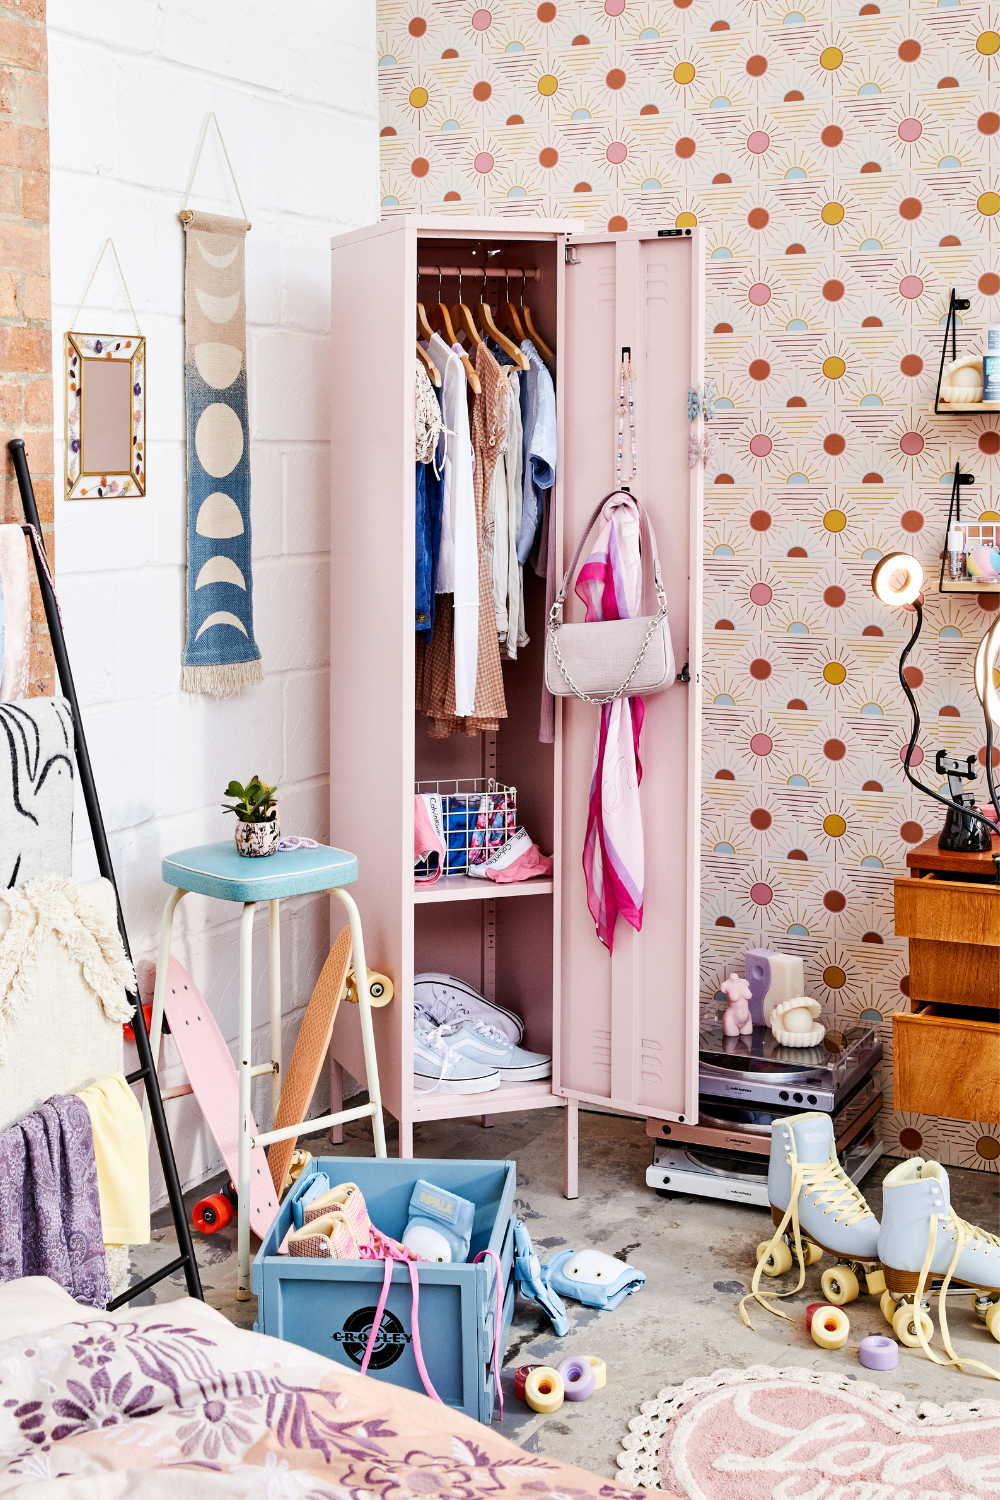 A Blush Skinny is open to reveal clothes, bags and accessories, while on the floor lie skateboards, rollerskates and records in pastel colours.